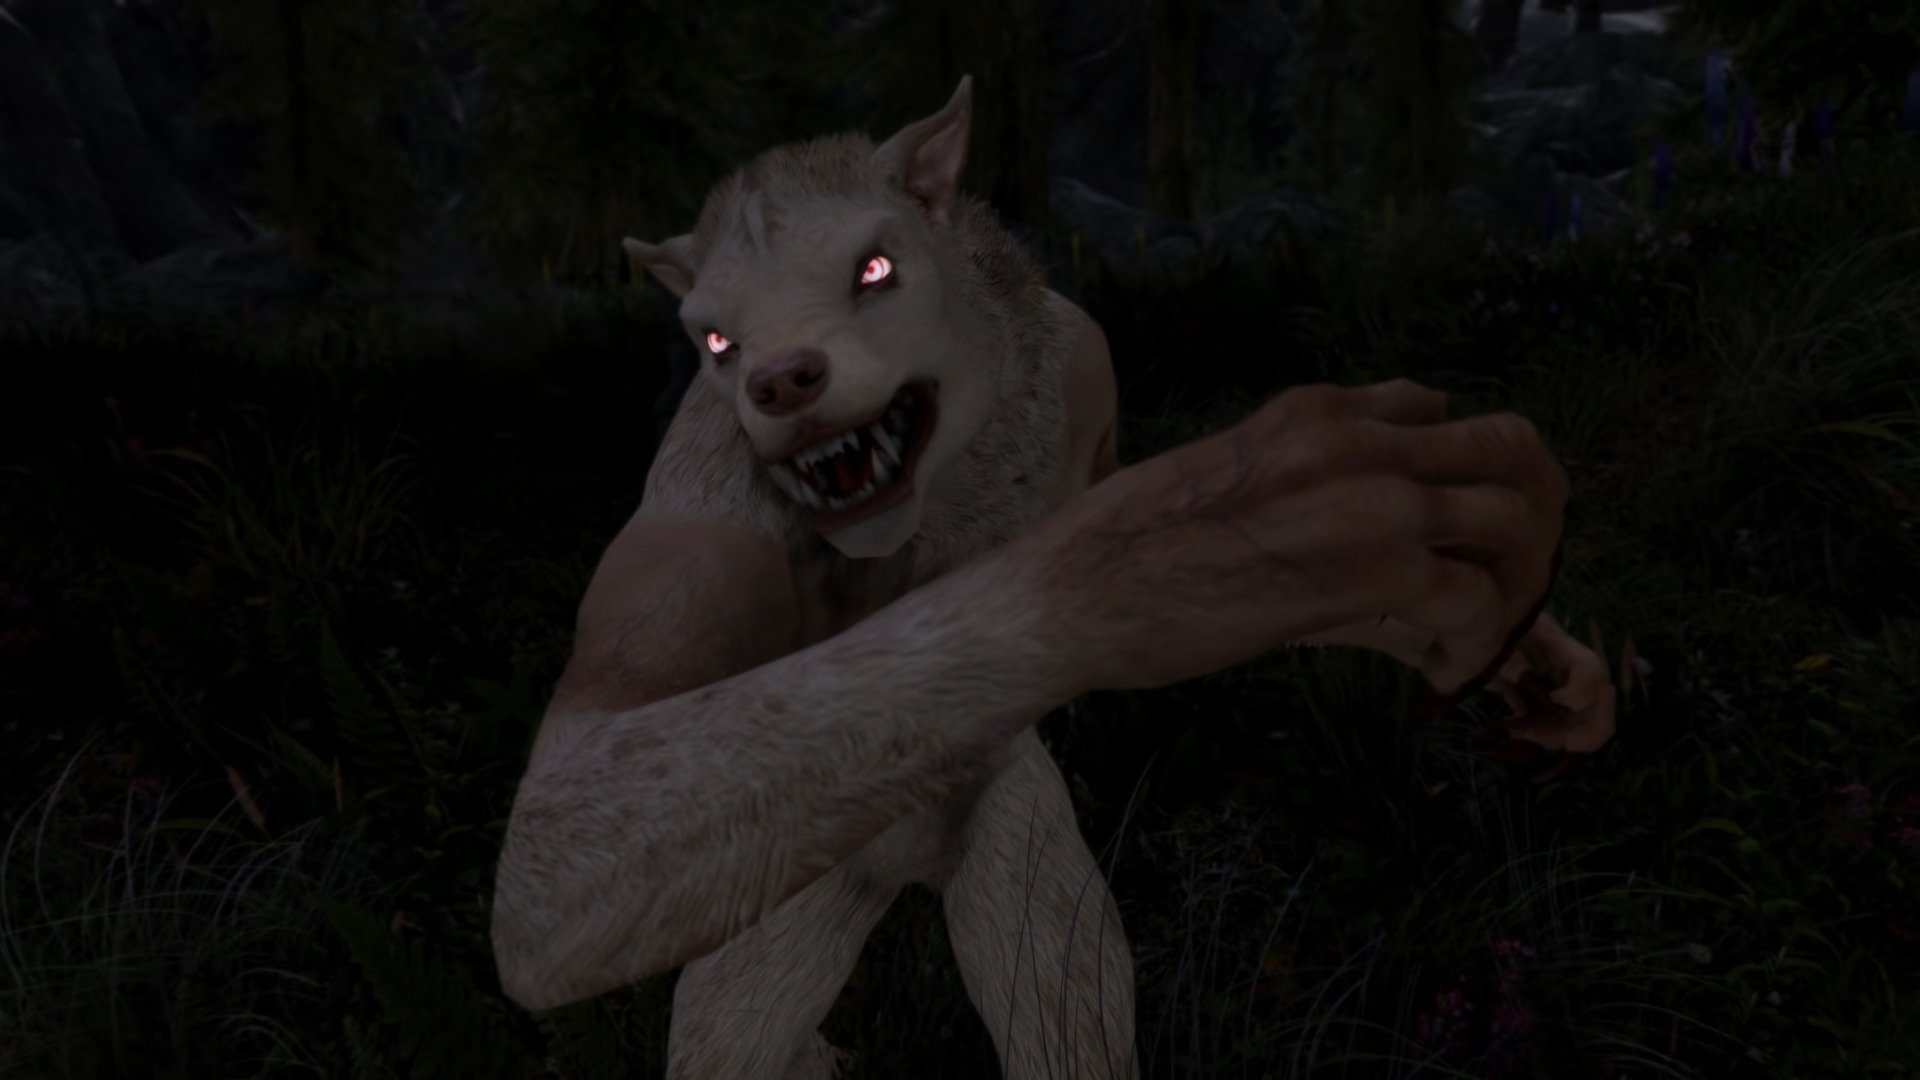 Skyrim Build Ideas: The Werewolf – Perks, Items, and Roleplay Ideas For New Playstyle